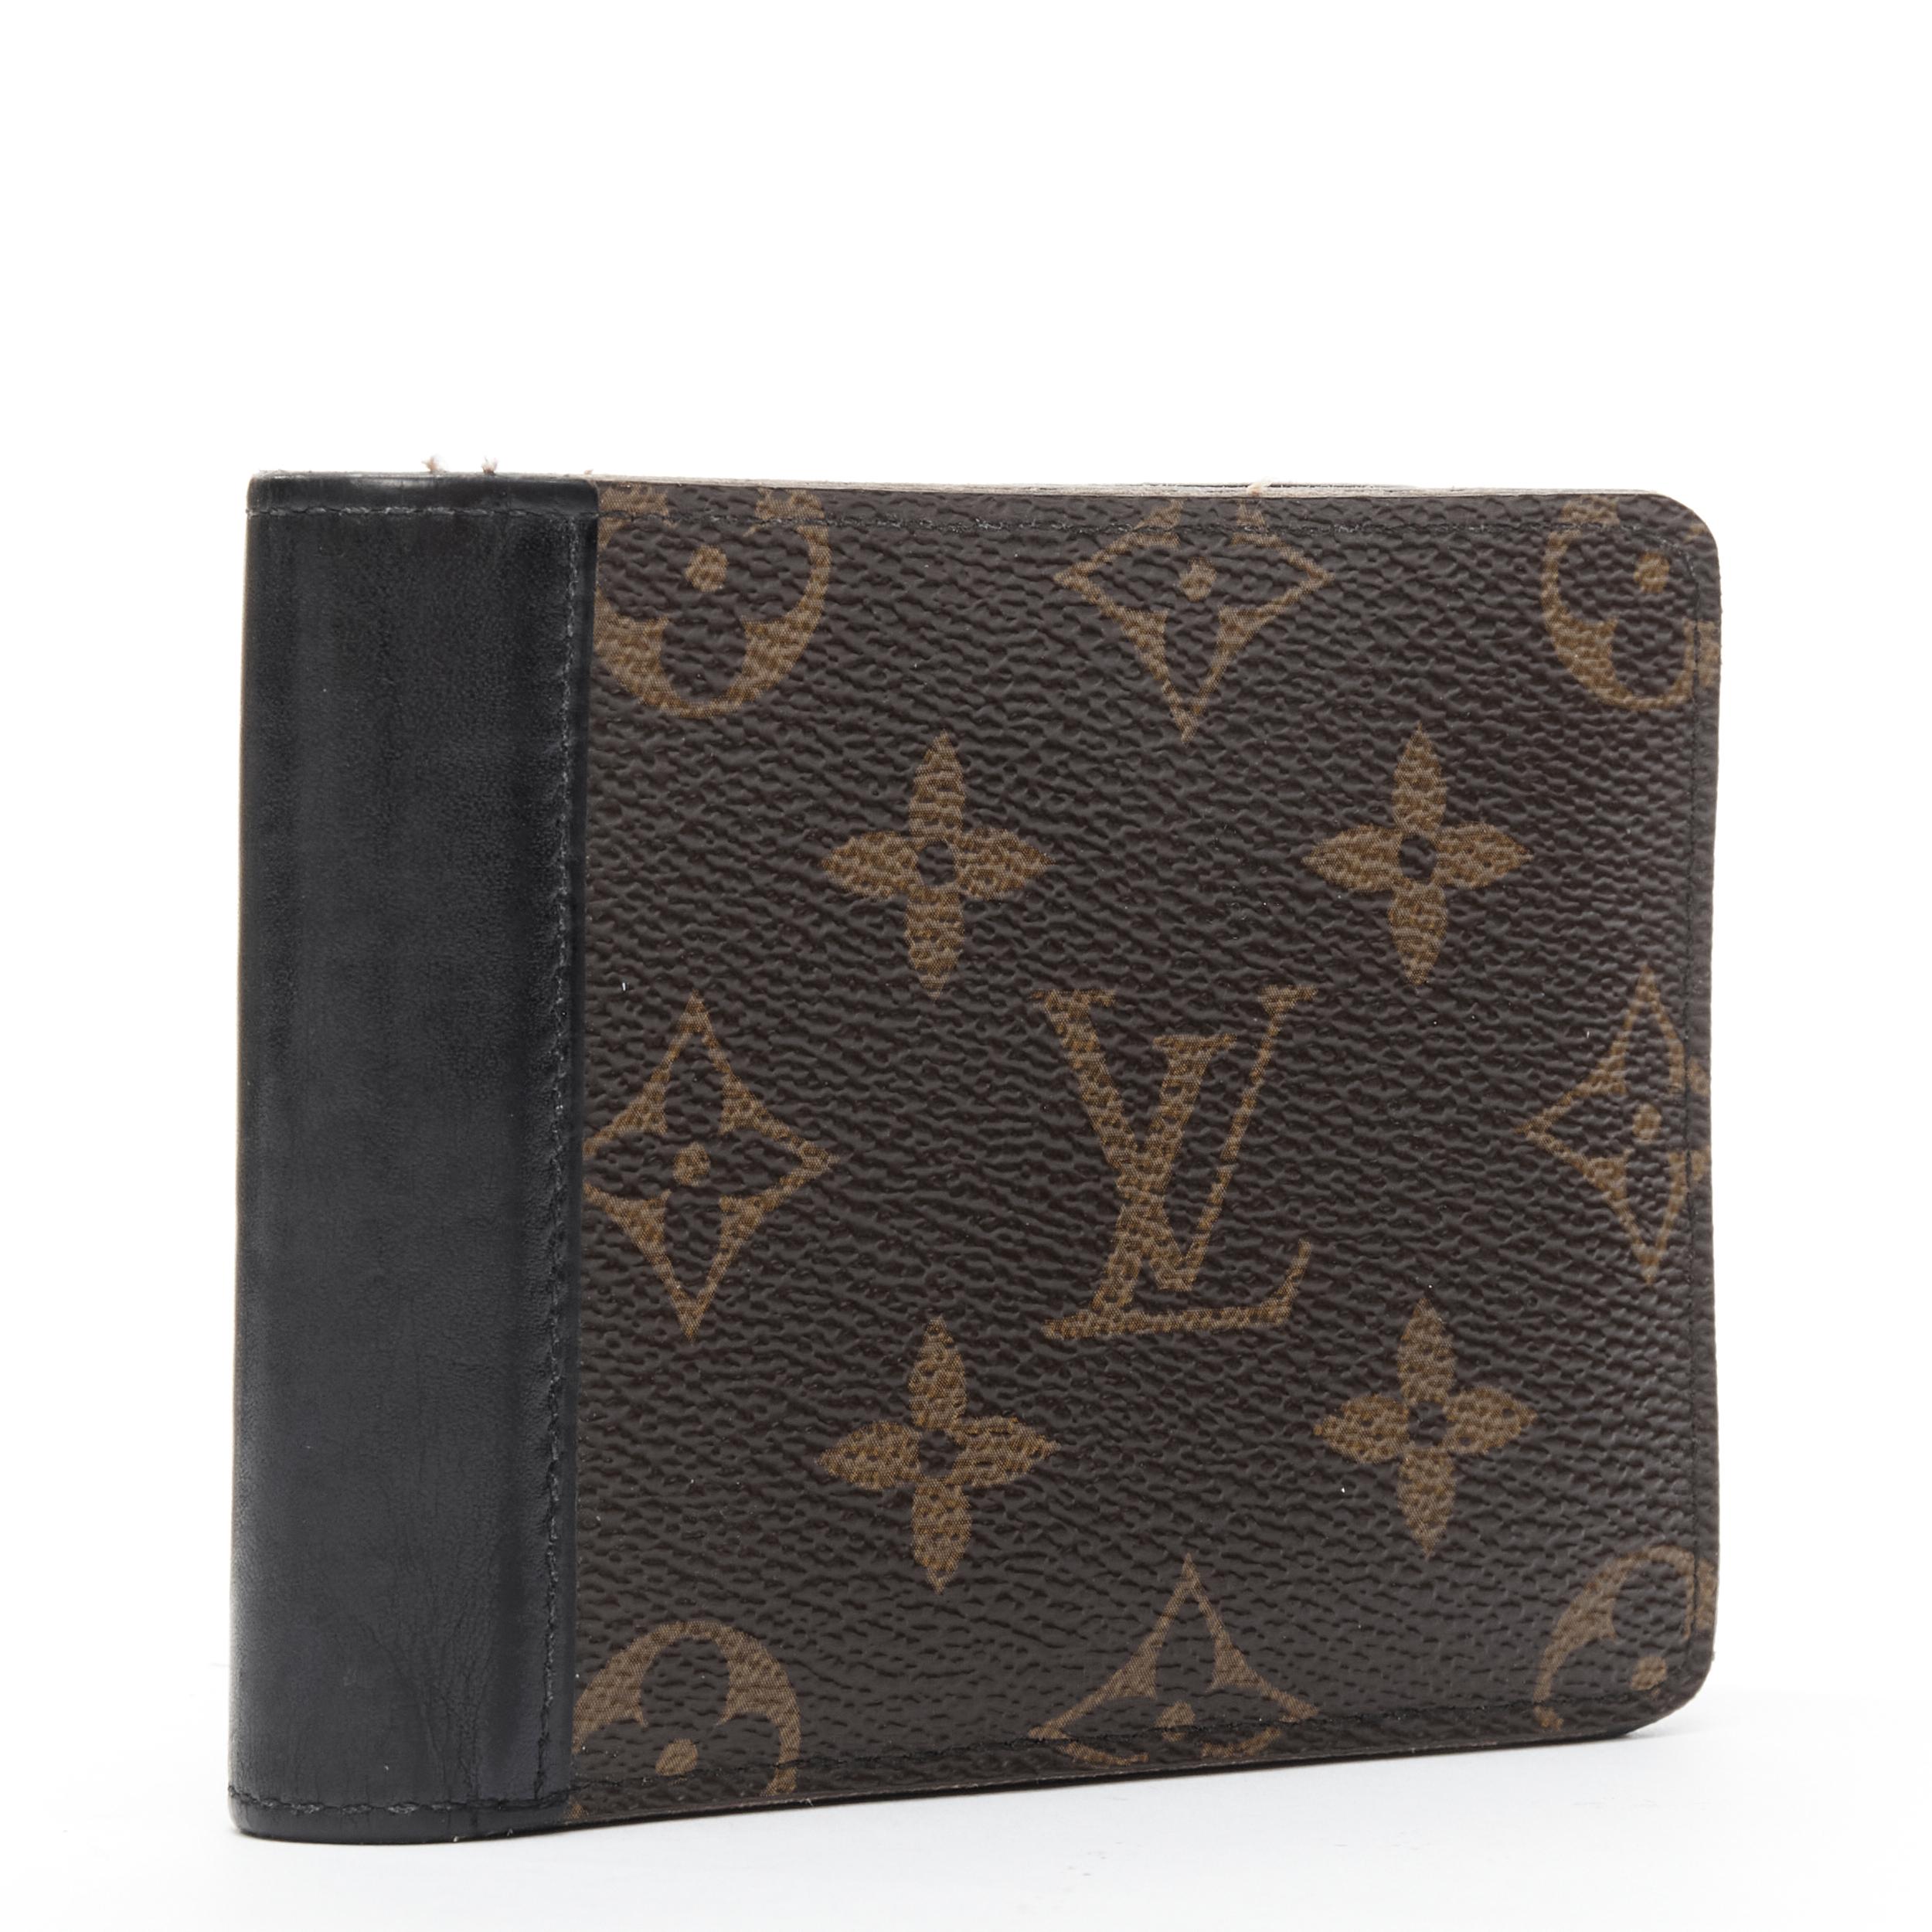 LOUIS VUITTON black leather spine brown LV monogram canvas bifold wallet 
Reference: TALI/A00005 
Brand: Louis Vuitton 
Material: Canvas 
Color: Brown 
Pattern: Abstract 
Extra Detail: Bifold wallet. Brown monogram canvas. Black leather trimming.